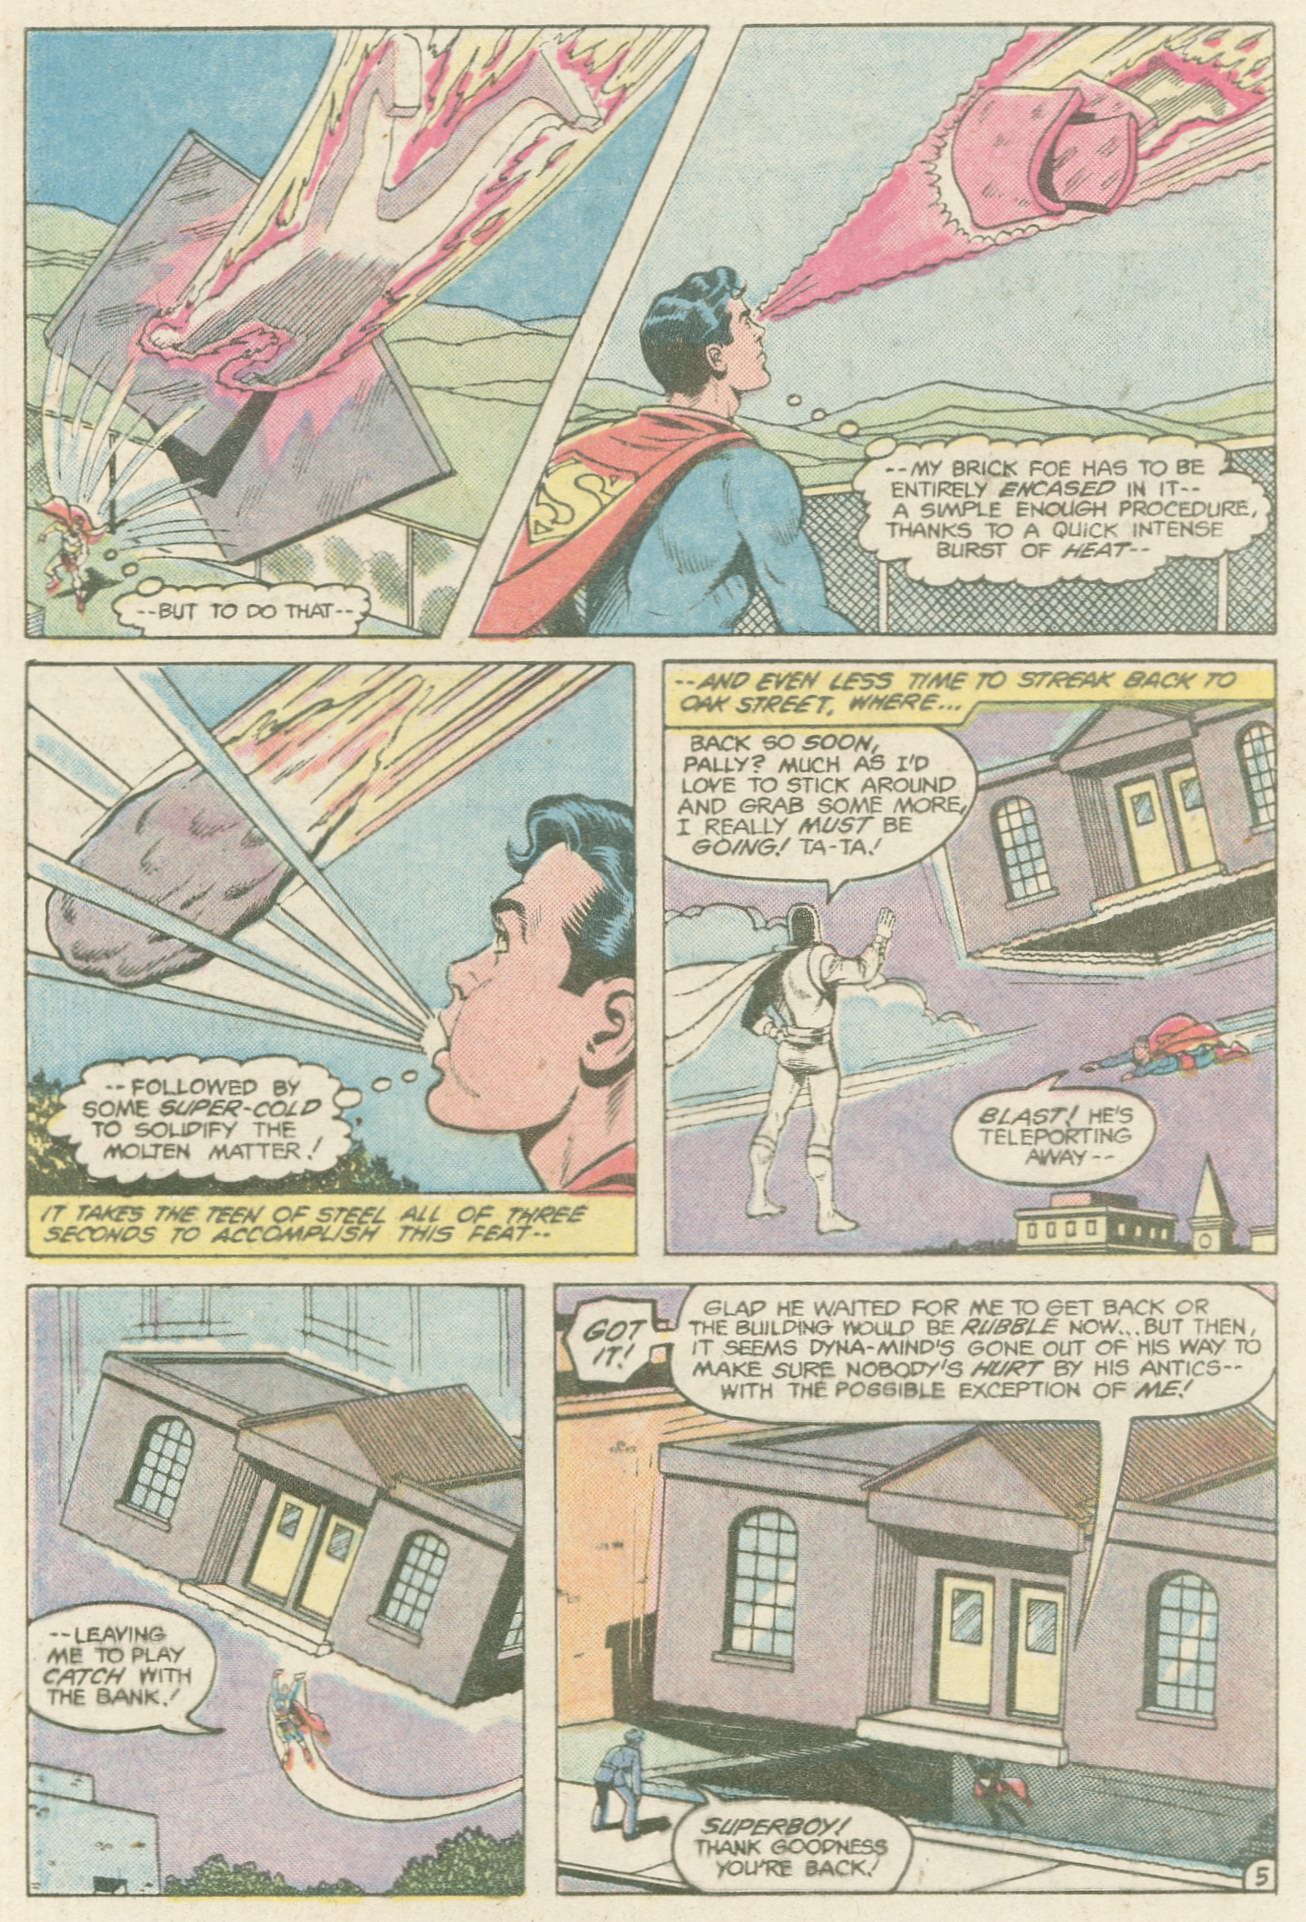 The New Adventures of Superboy 43 Page 5